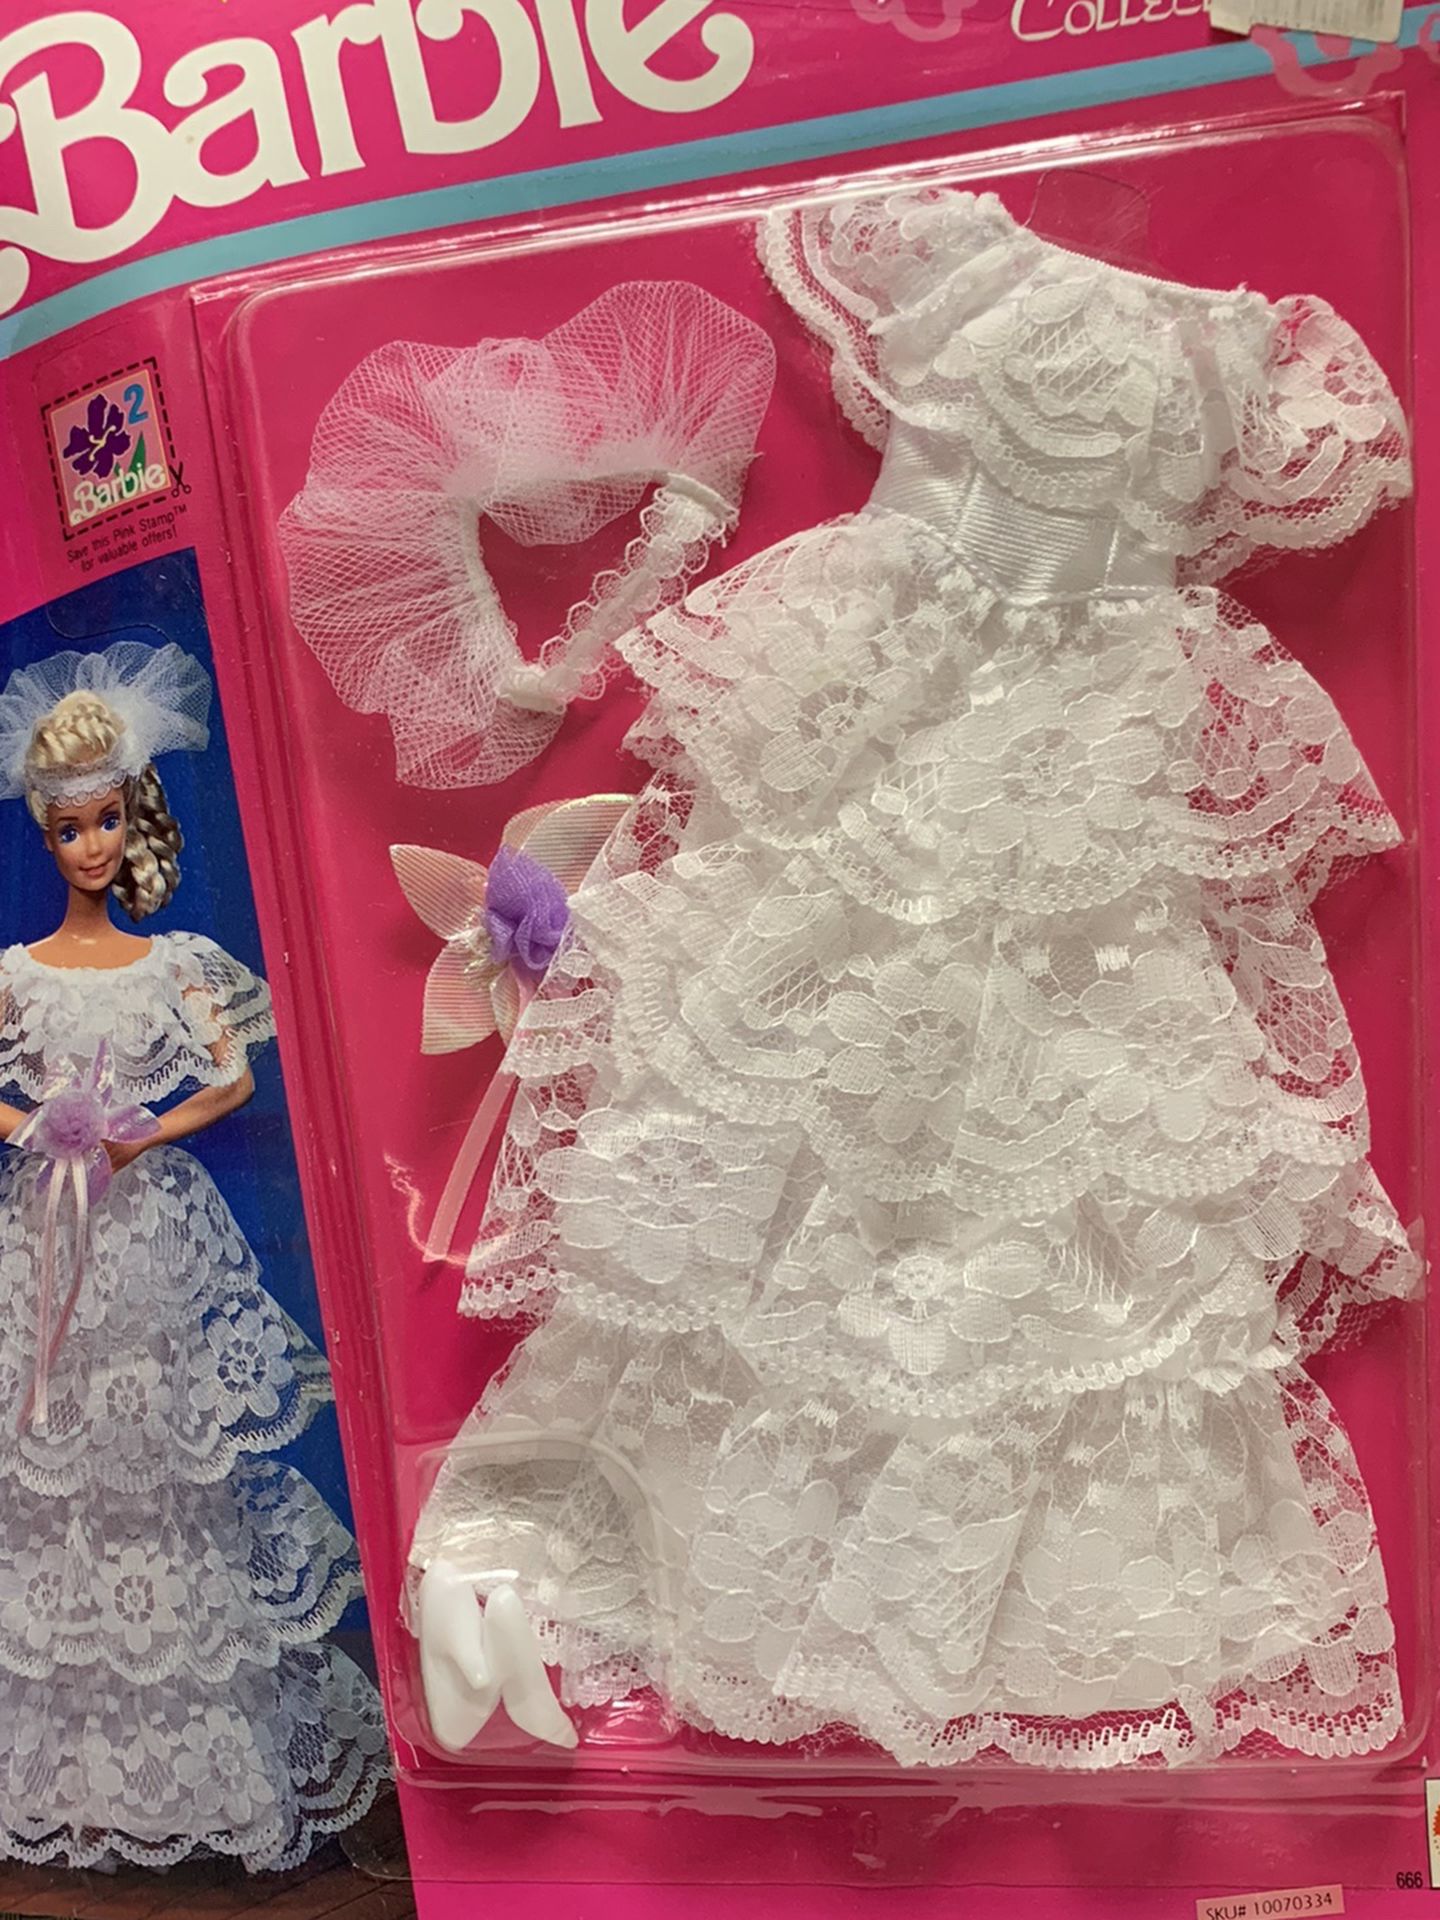 6 New In Original Packaging Barbie Clothes